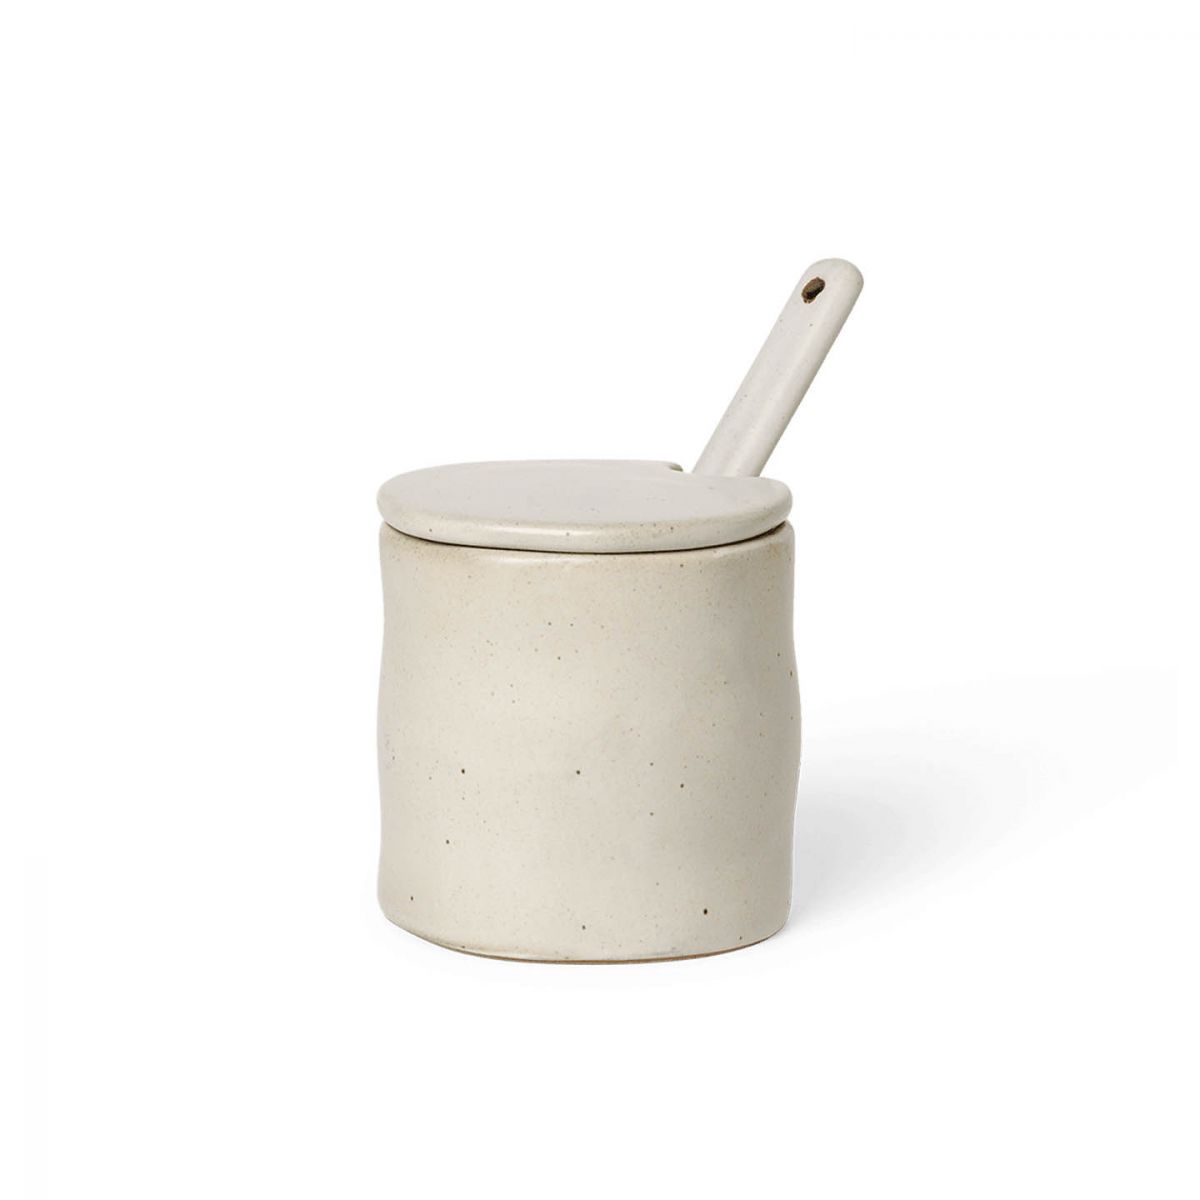 Flow Jar with spoon - Off-white Speckle